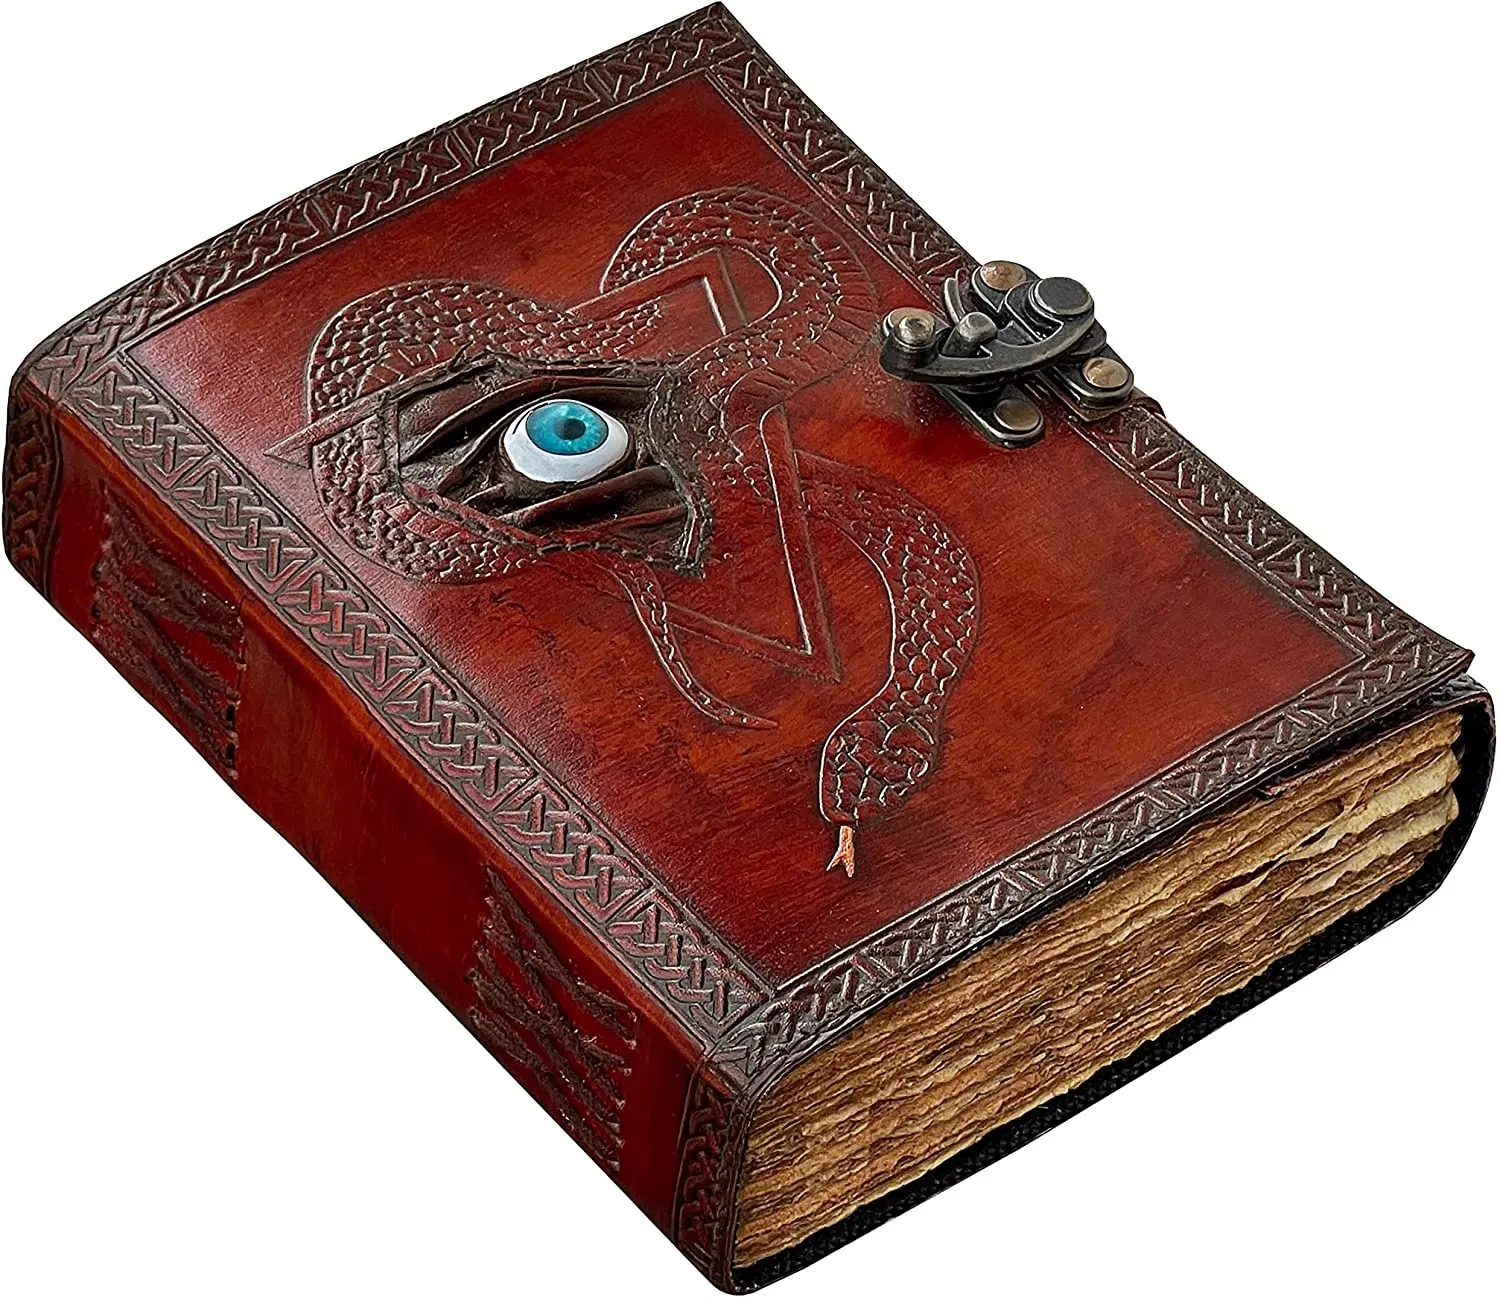 High Quality Leather Journal Customizable Spell Book Vintage Paper Grimoire Sketchbook Travel Dairy